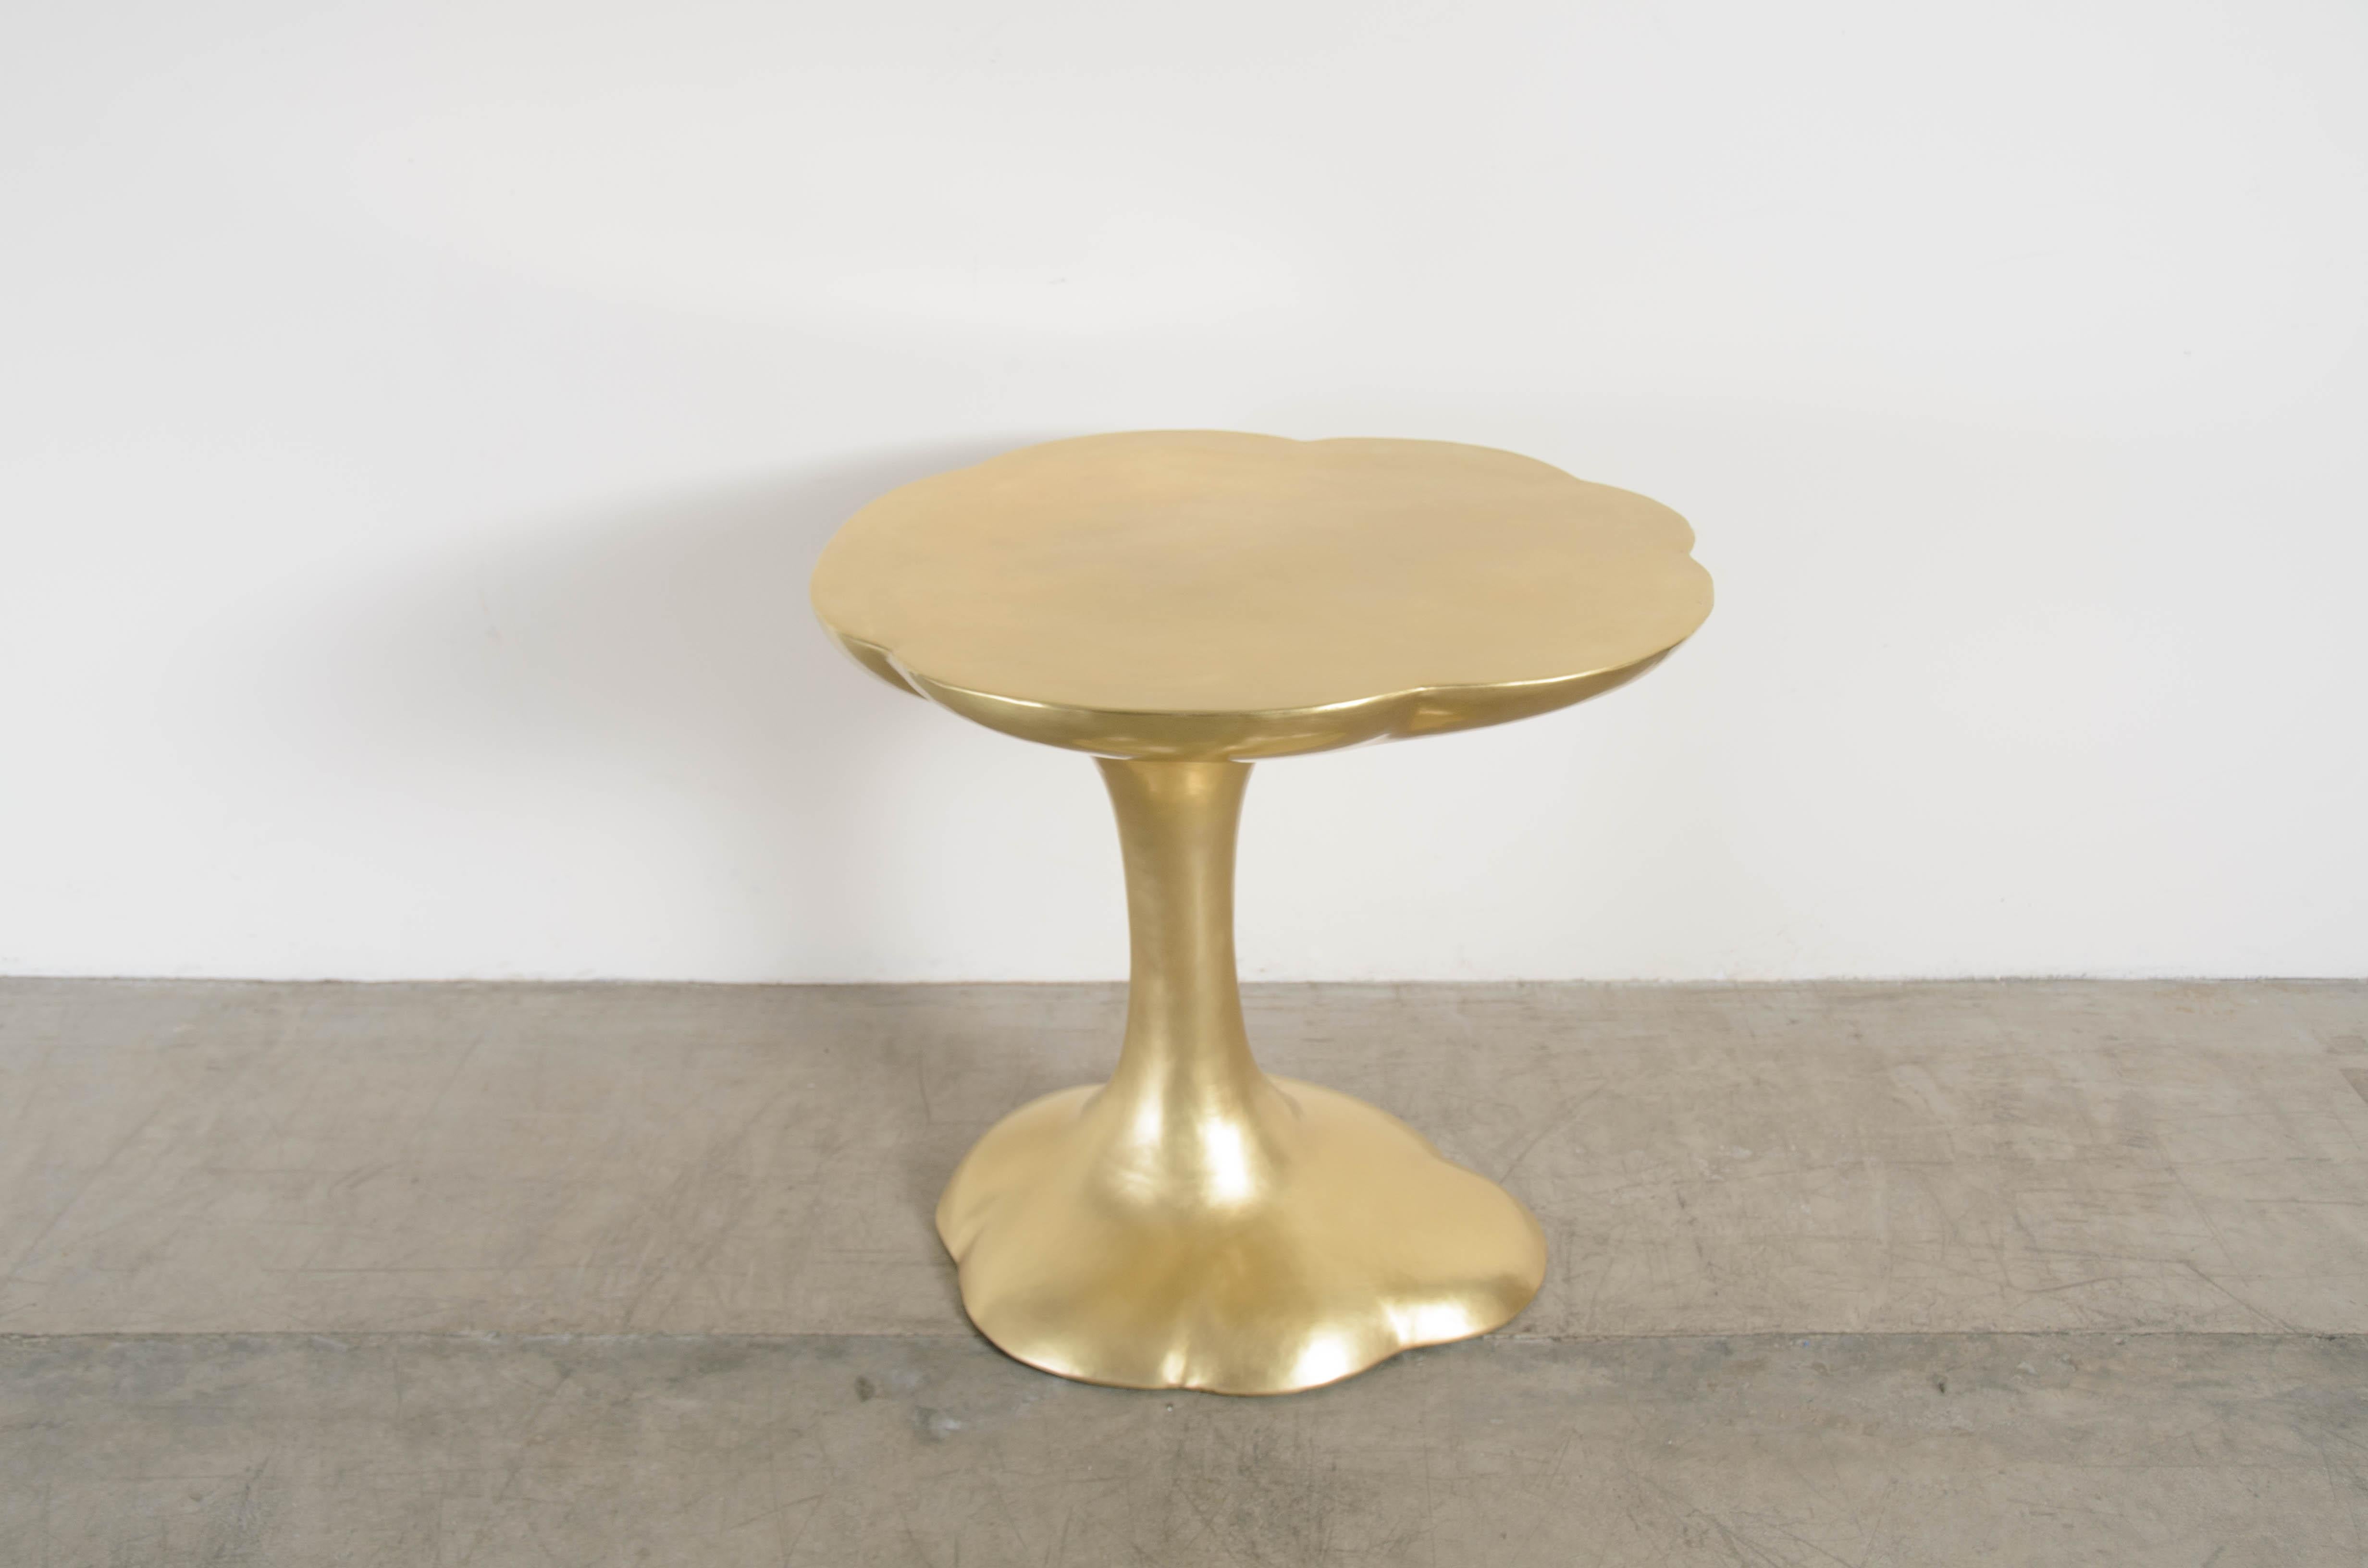 Modern Contemporary Hand Repoussé Nuage Side Table in Brass by Robert Kuo For Sale